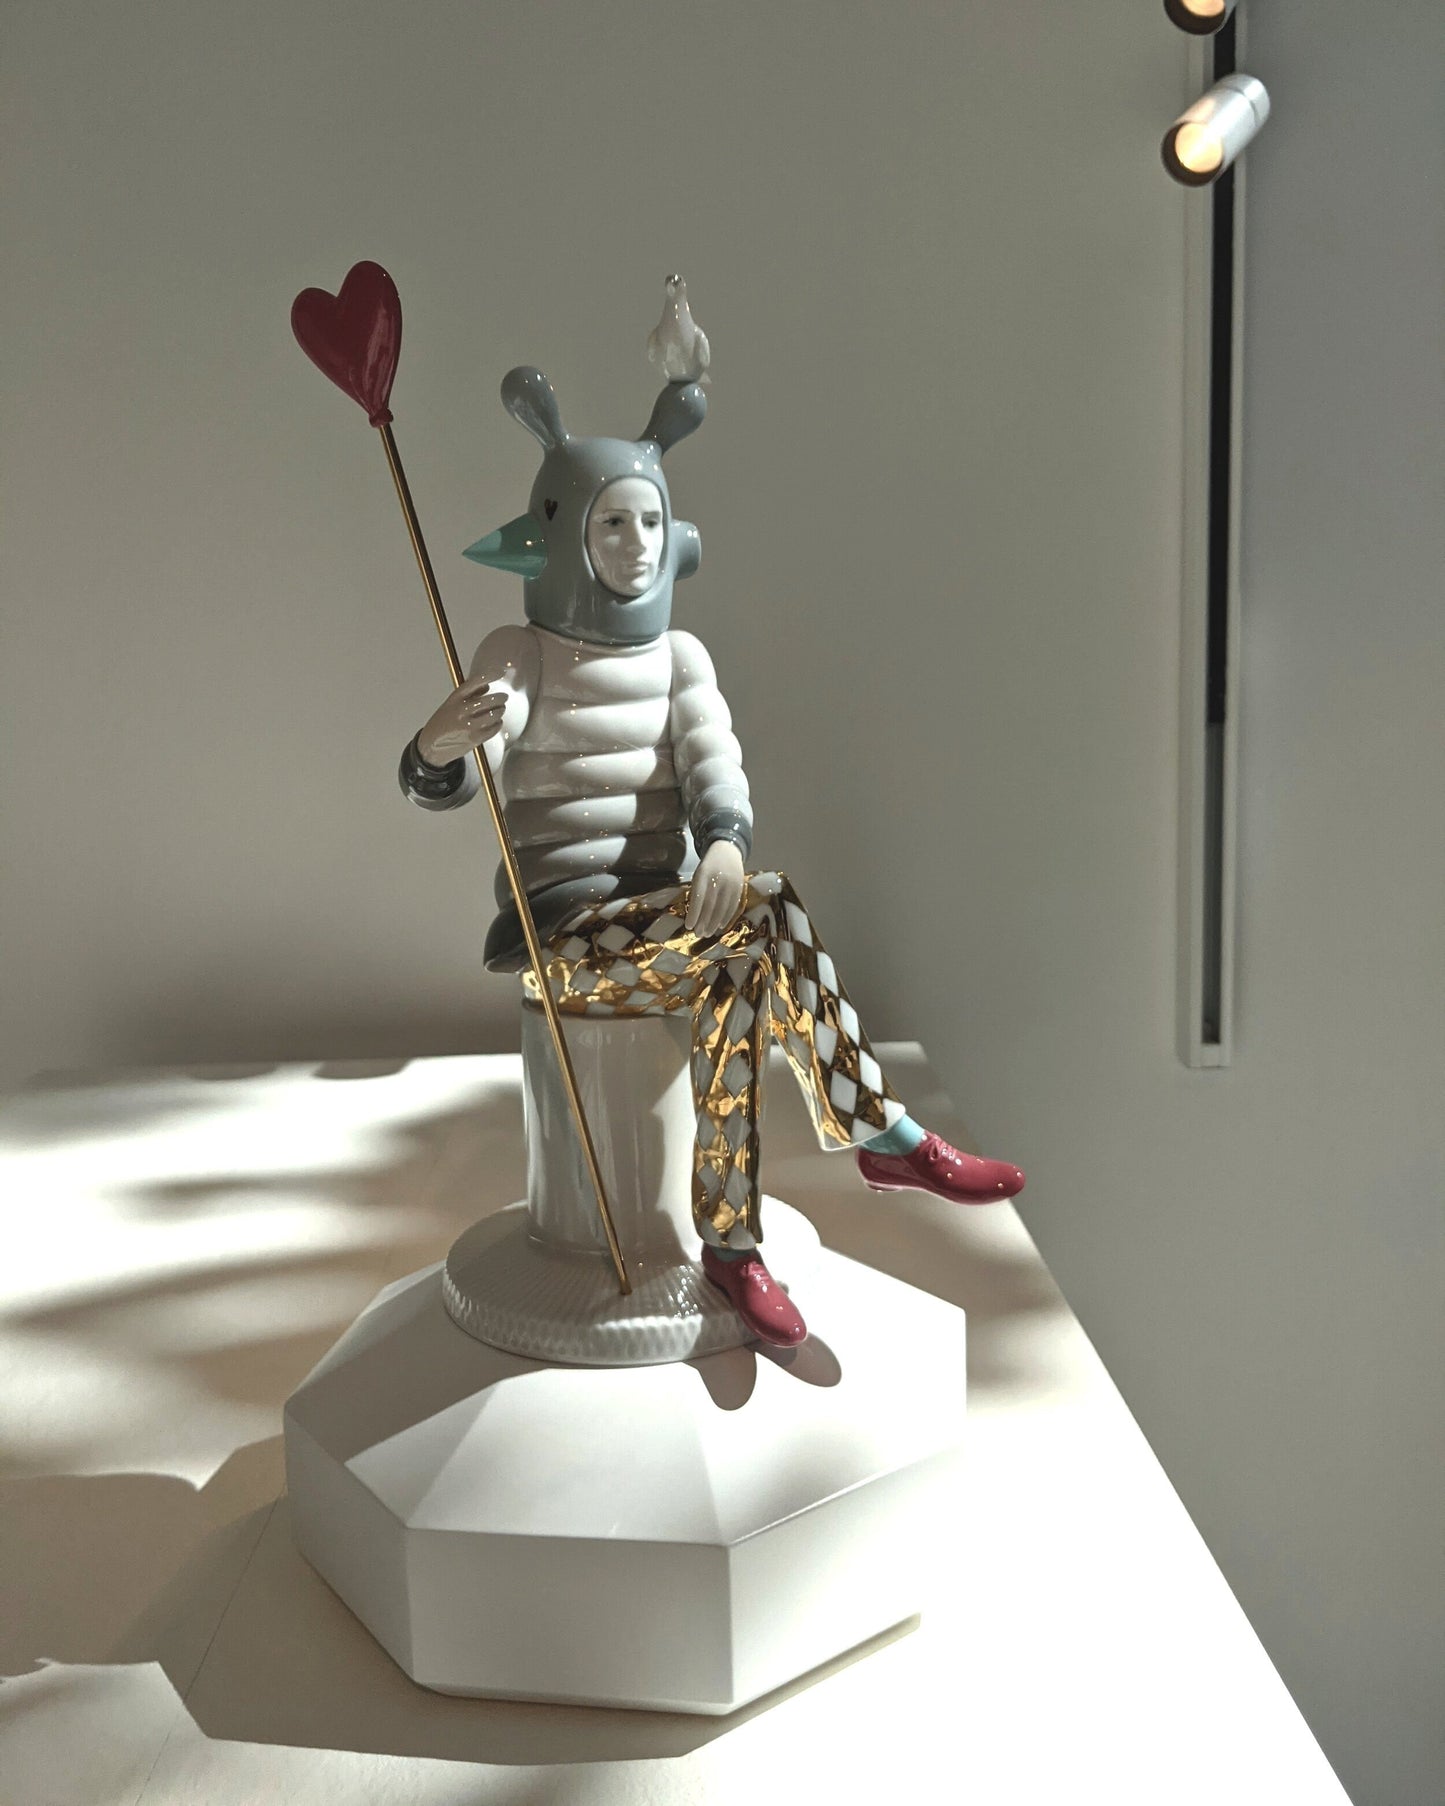 The Lover Figurines By Jaime Hayon - FormFluent